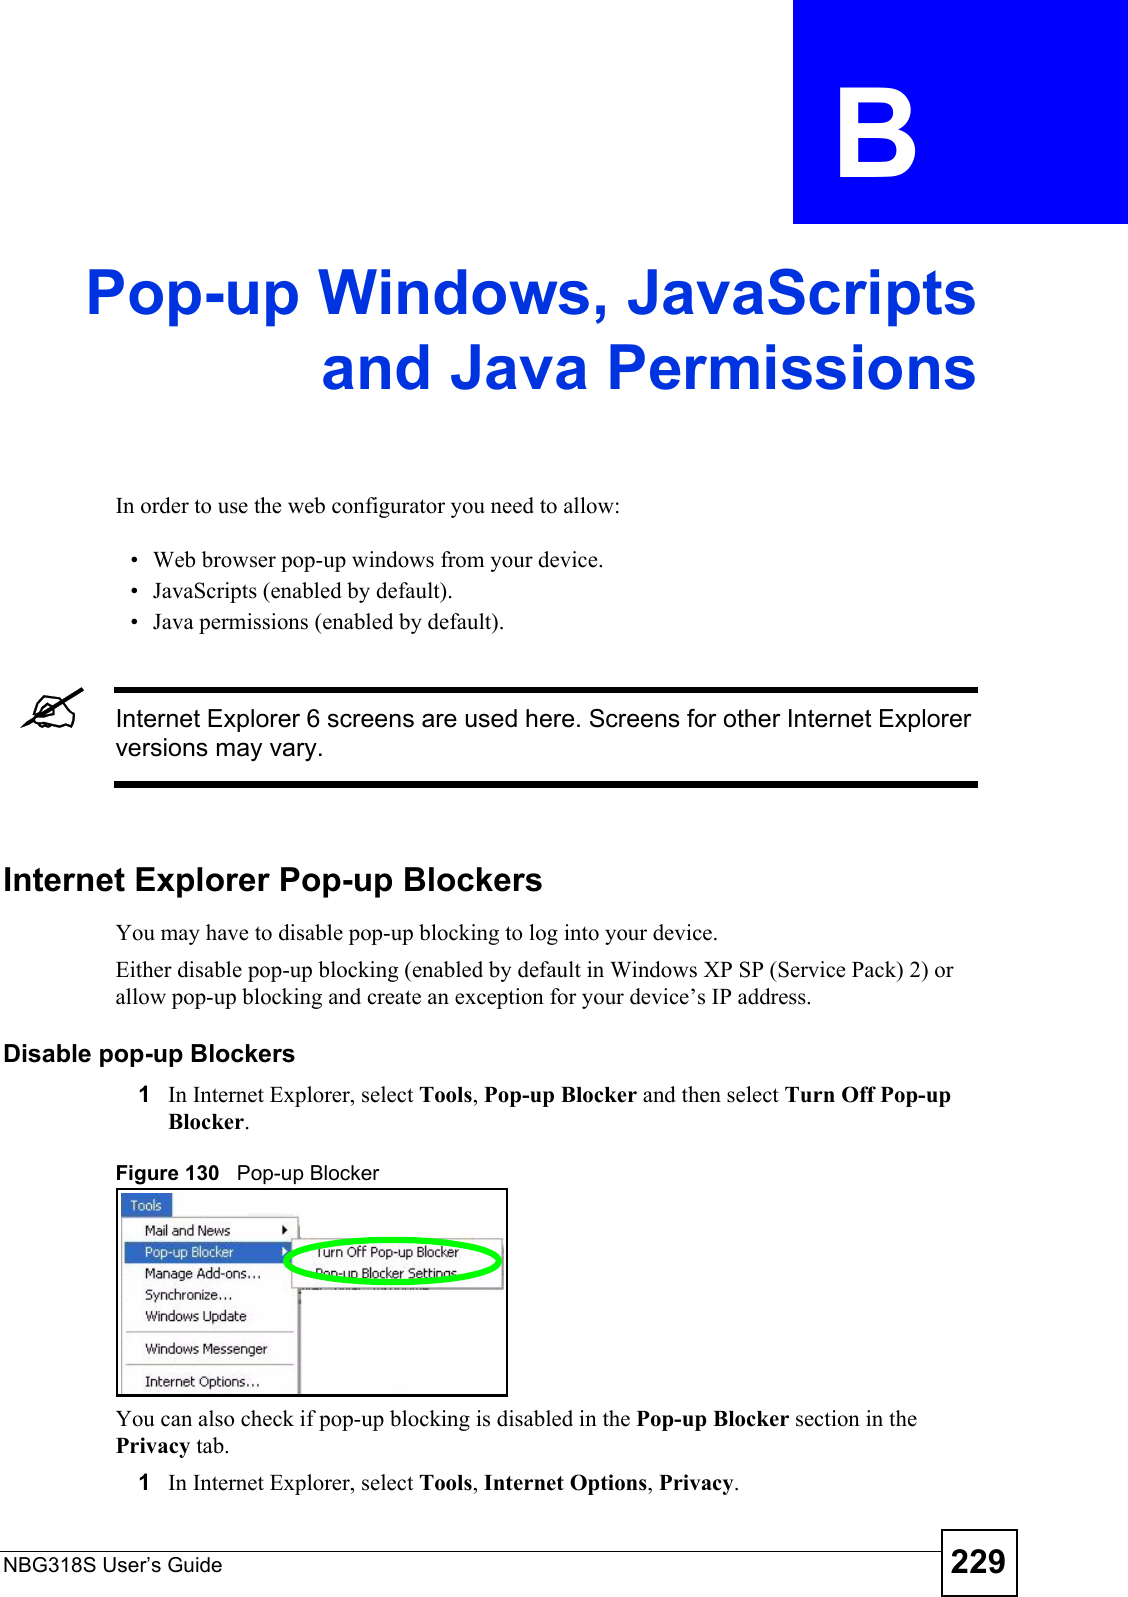 NBG318S User’s Guide 229APPENDIX  B Pop-up Windows, JavaScriptsand Java PermissionsIn order to use the web configurator you need to allow:• Web browser pop-up windows from your device.• JavaScripts (enabled by default).• Java permissions (enabled by default).&quot;Internet Explorer 6 screens are used here. Screens for other Internet Explorer versions may vary.Internet Explorer Pop-up BlockersYou may have to disable pop-up blocking to log into your device. Either disable pop-up blocking (enabled by default in Windows XP SP (Service Pack) 2) or allow pop-up blocking and create an exception for your device’s IP address.Disable pop-up Blockers1In Internet Explorer, select Tools, Pop-up Blocker and then select Turn Off Pop-up Blocker. Figure 130   Pop-up BlockerYou can also check if pop-up blocking is disabled in the Pop-up Blocker section in the Privacy tab. 1In Internet Explorer, select Tools, Internet Options, Privacy.